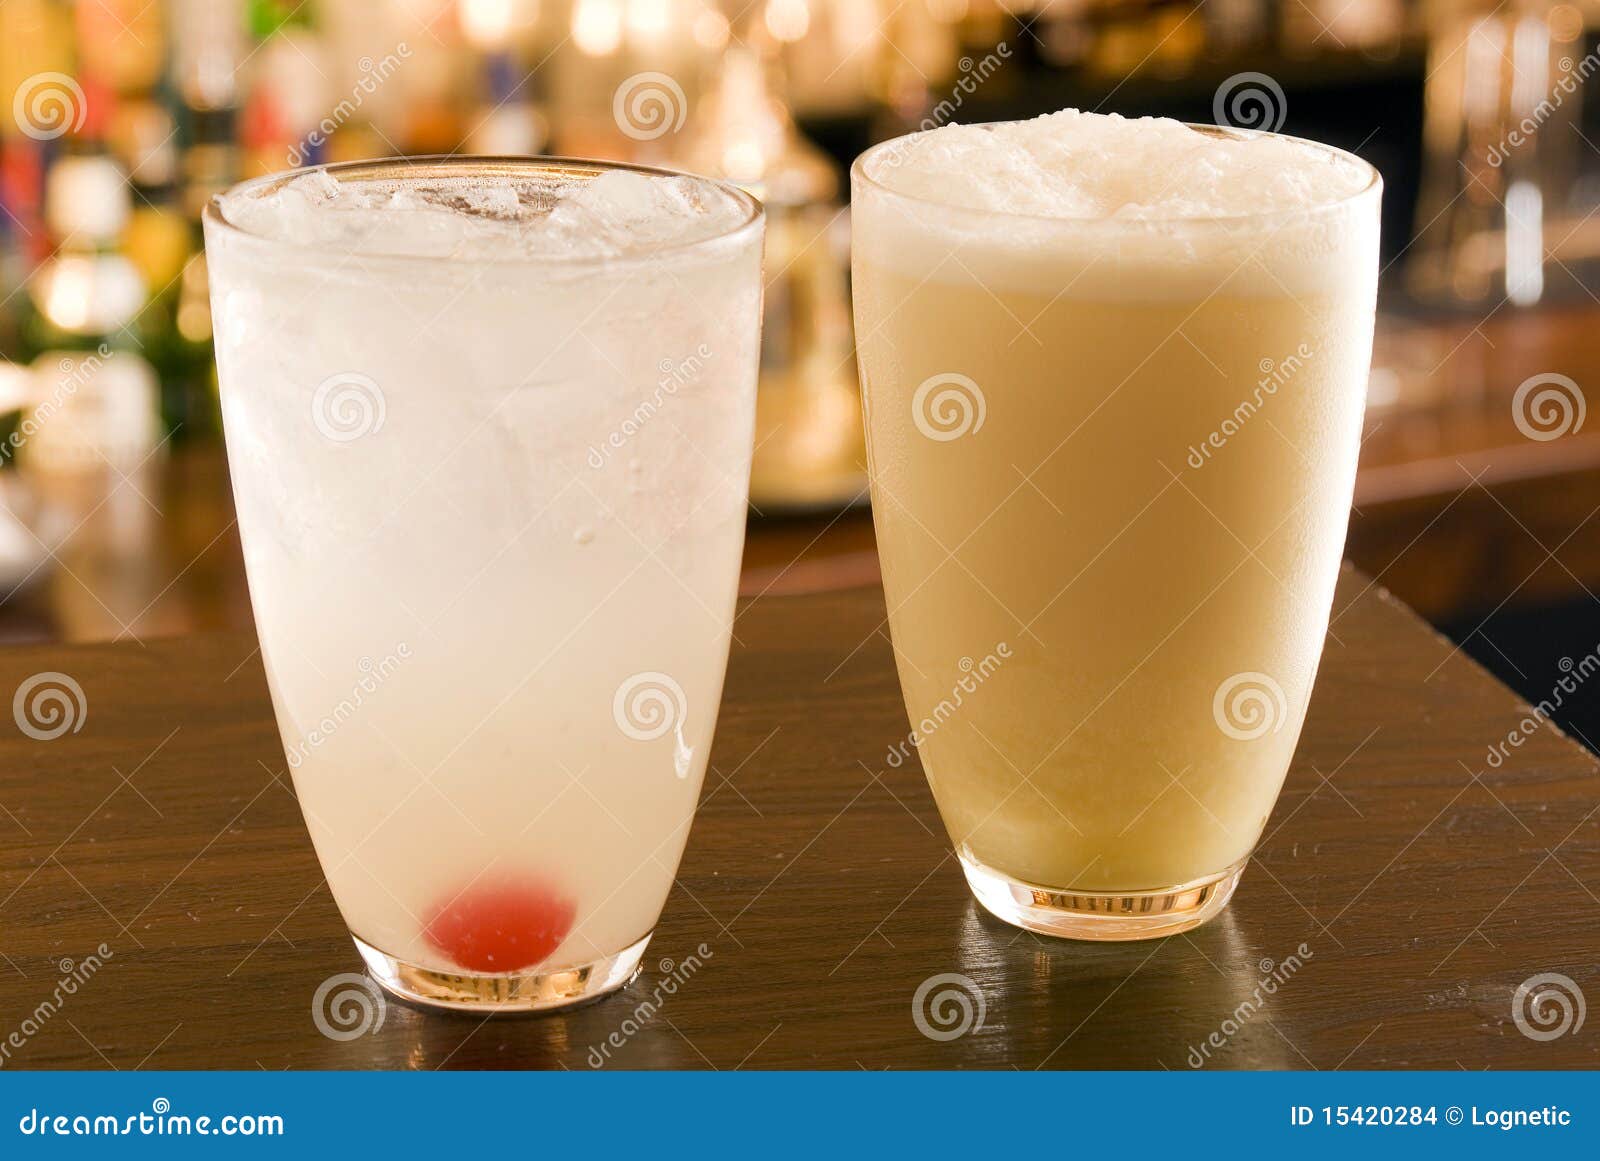 fizzes collins and ramos fizz